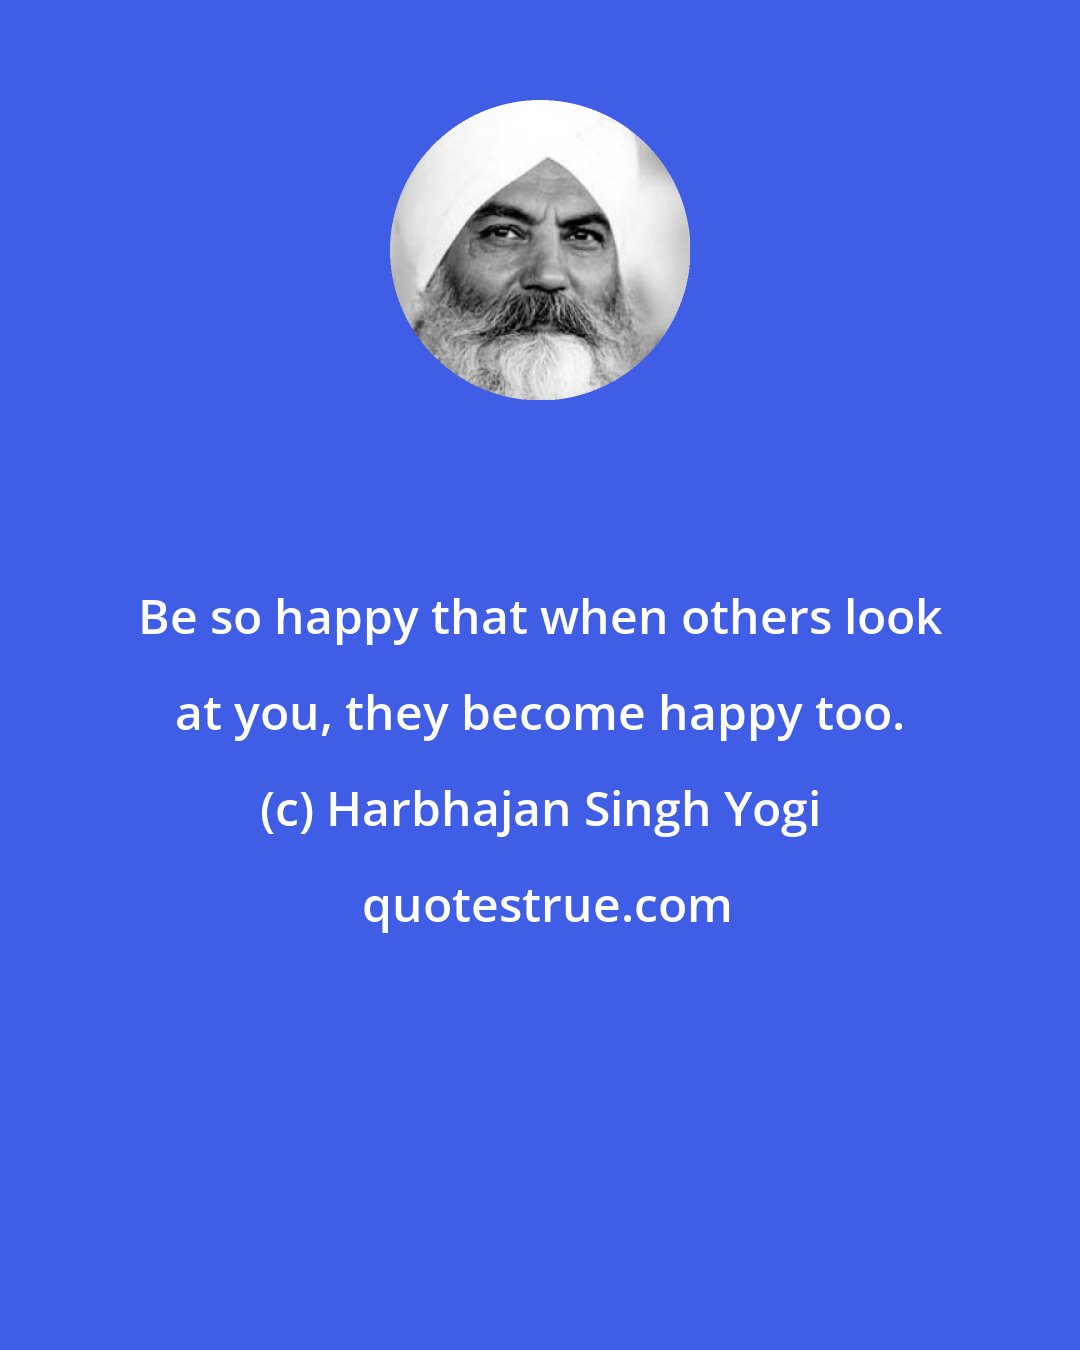 Harbhajan Singh Yogi: Be so happy that when others look at you, they become happy too.